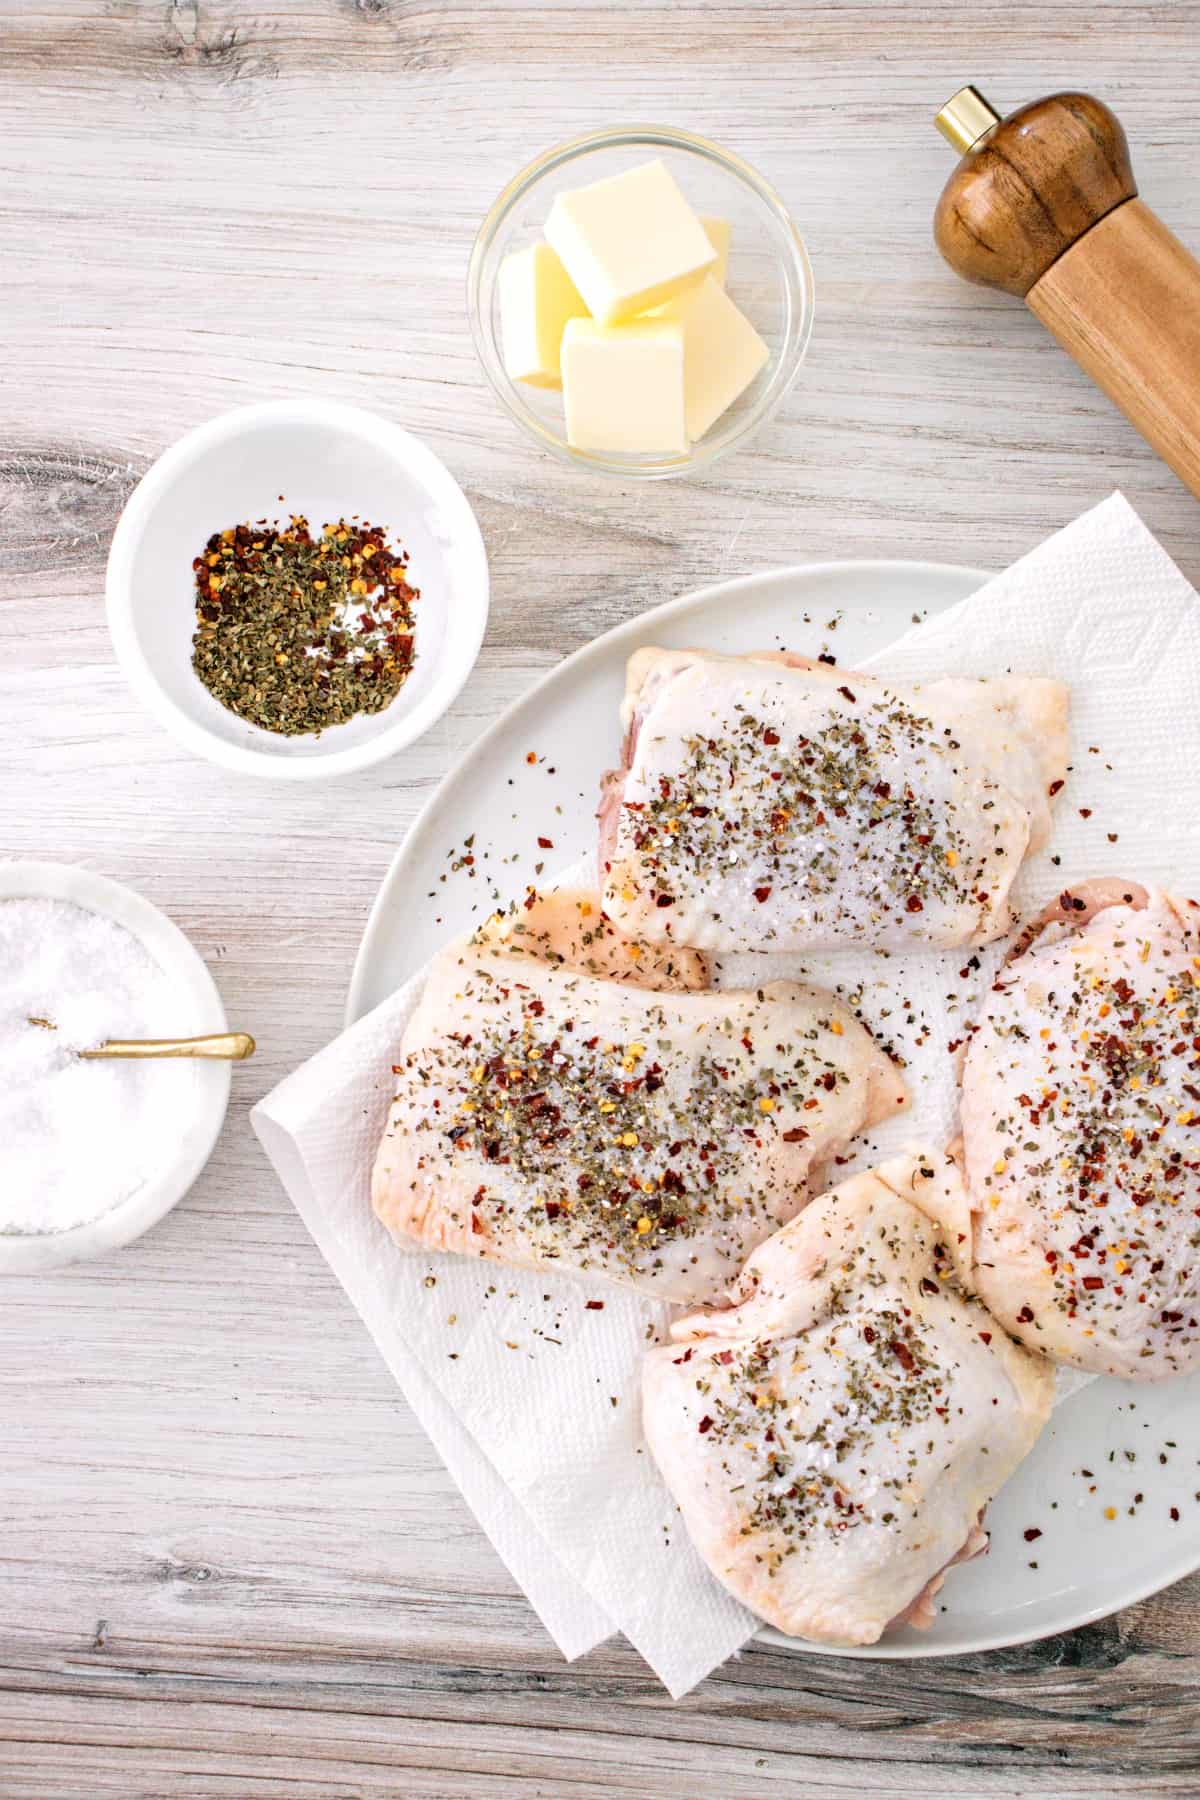 Raw chicken thighs coated generously with seasoning for baked chicken.